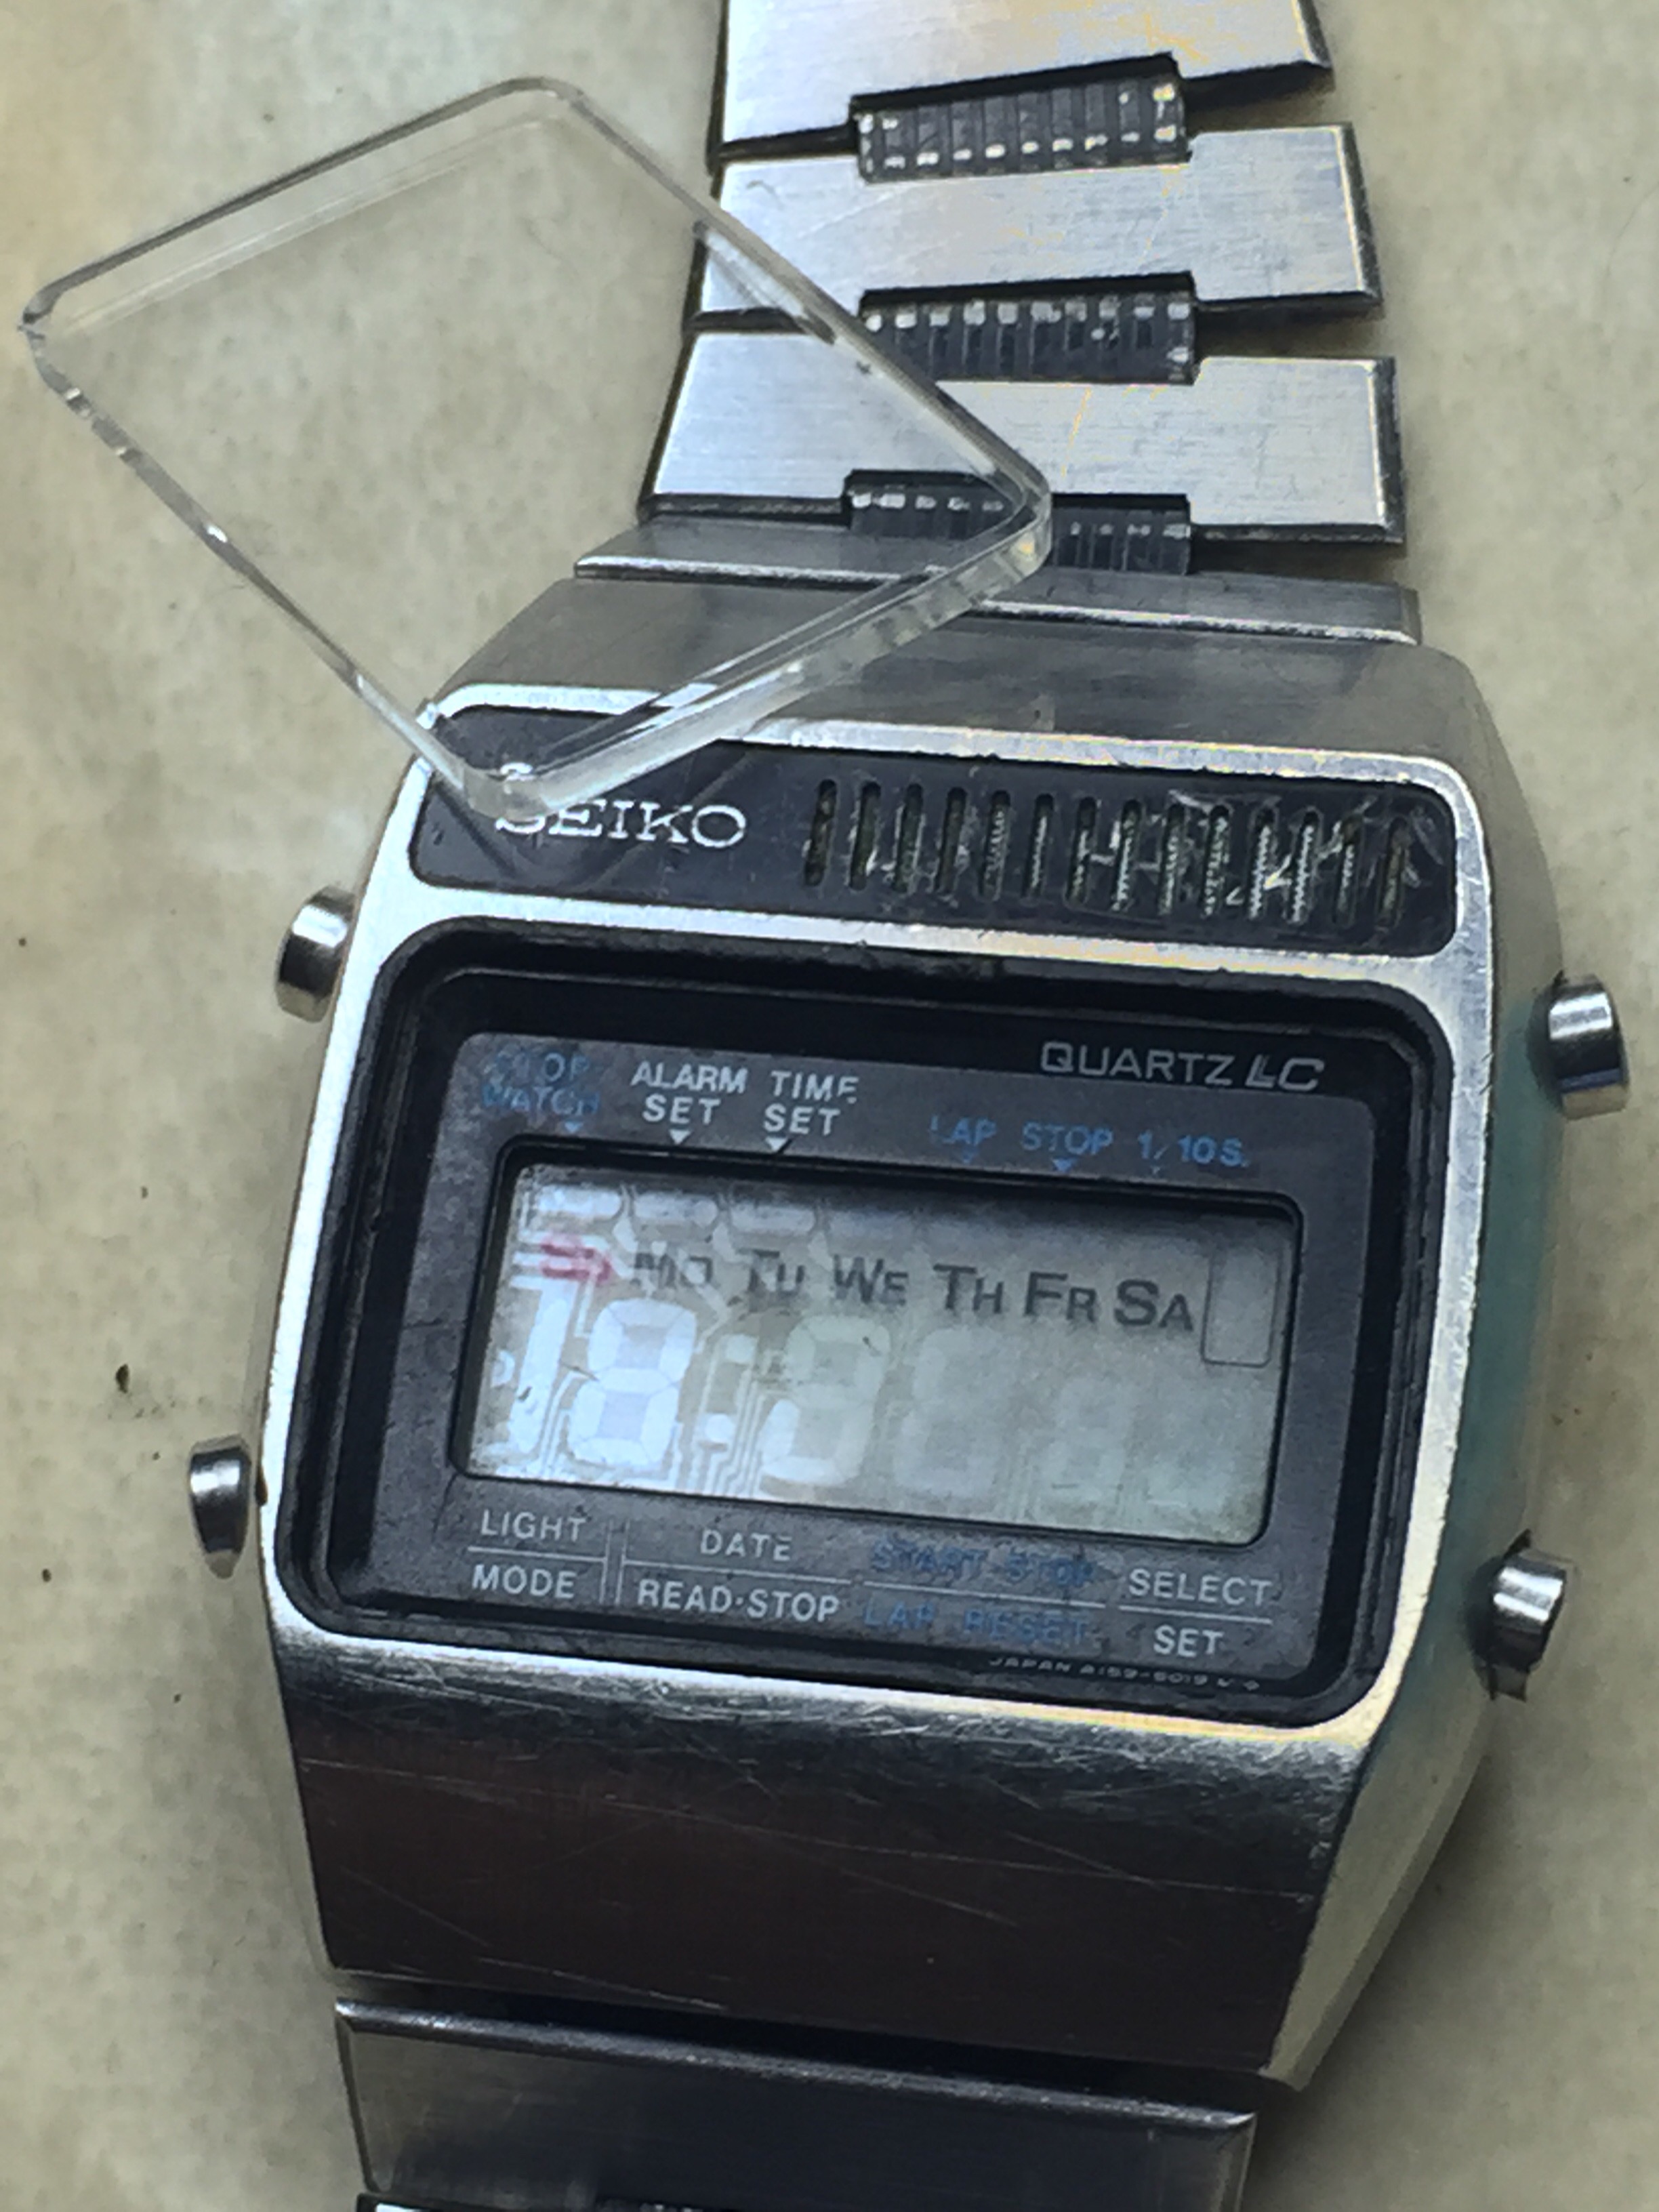 How to install Seiko Lcd crystal - Chat About Watches & The Industry Here -  Watch Repair Talk